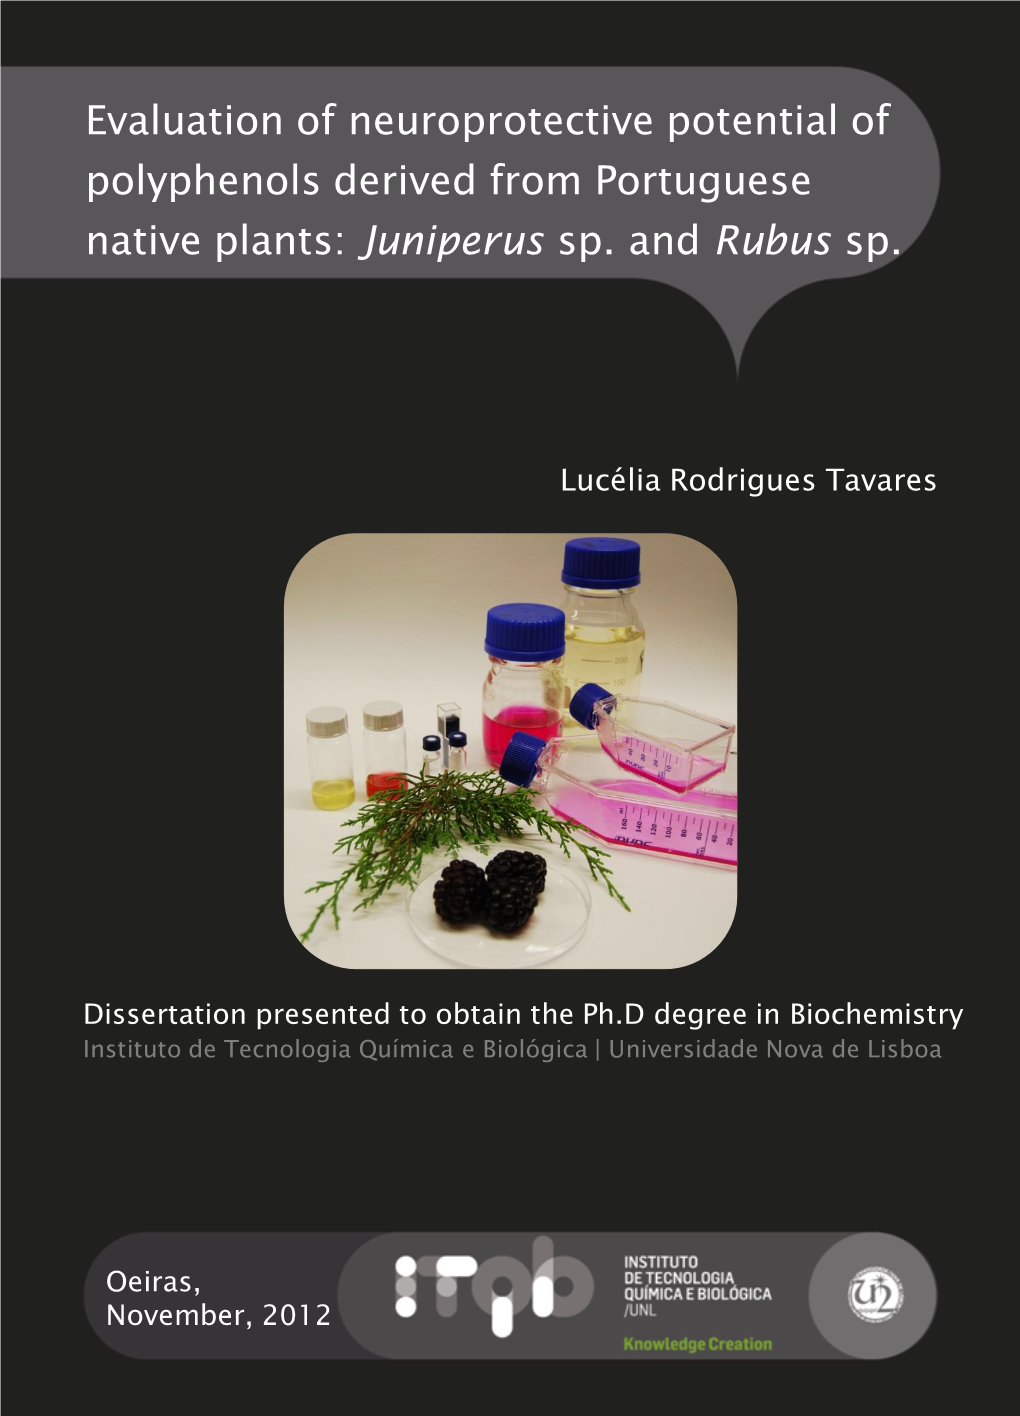 Evaluation of Neuroprotective Potential of Polyphenols Derived from Portuguese Native Plants: Juniperus Sp